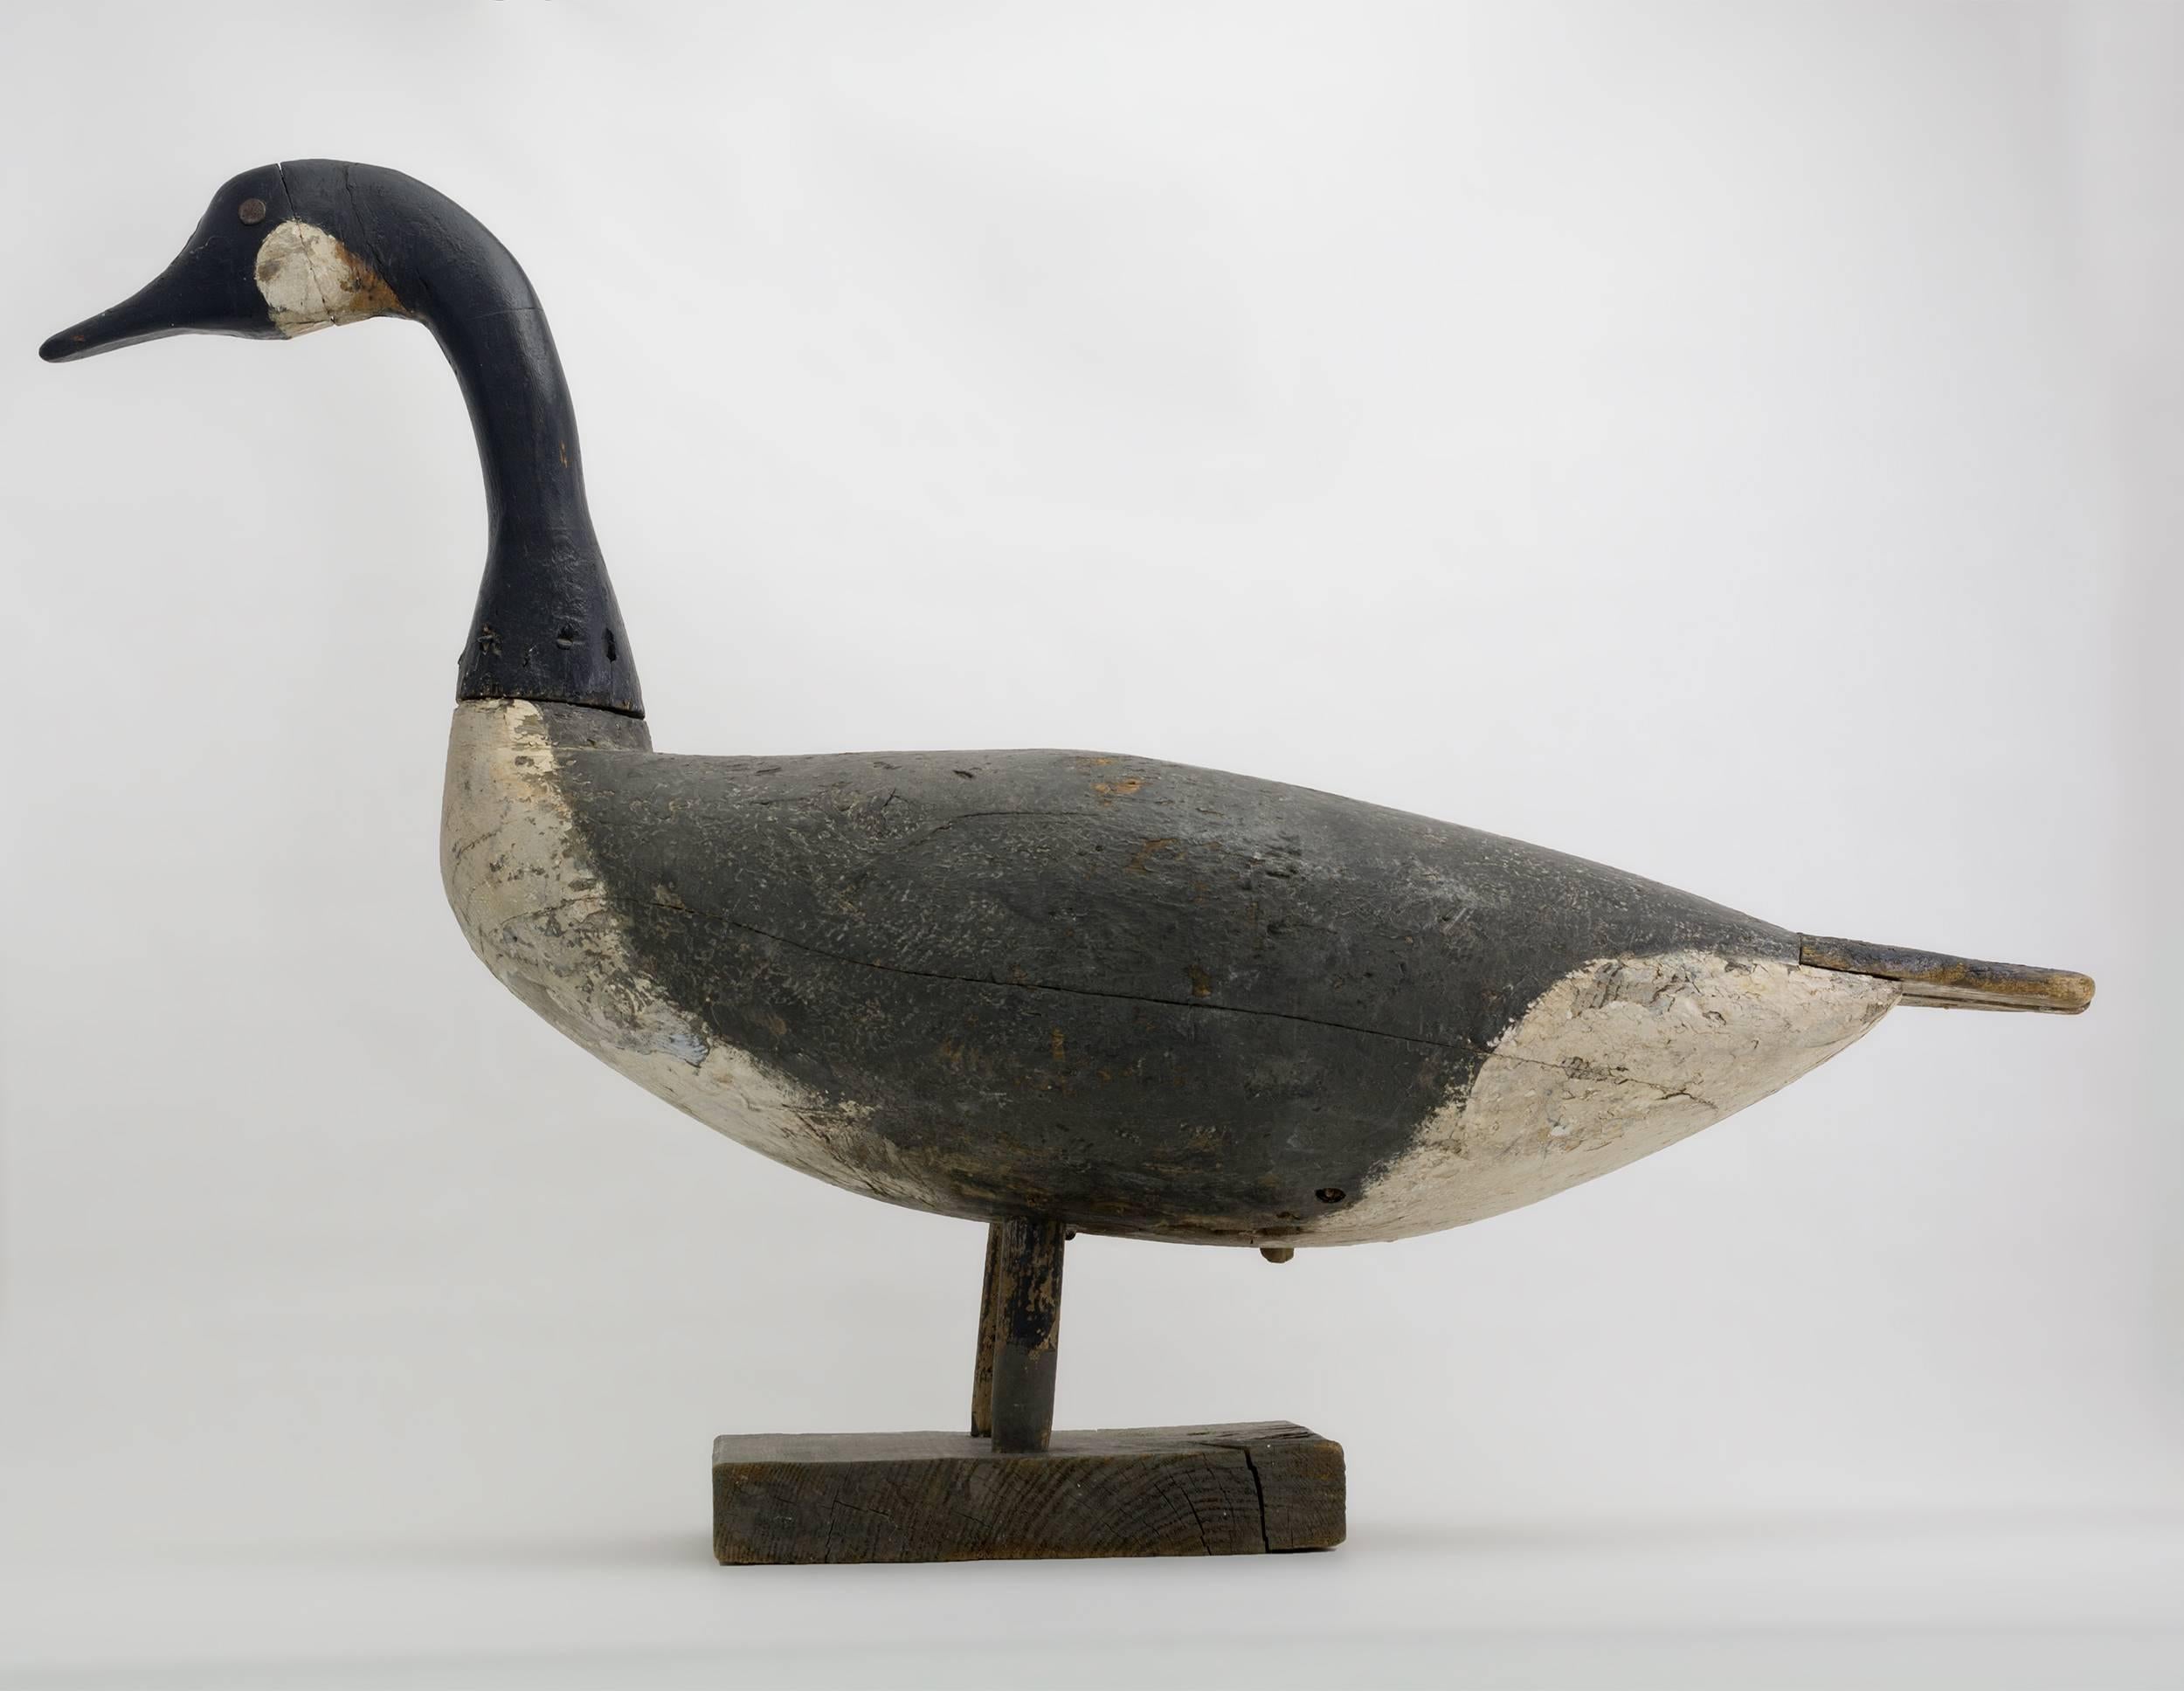 Working Goose Decoy attributed to Samuel Soper (1863-1943),Barnegat, New Jersey. This large decoy features tack eyes with a slat tail board. With a simple old hunter's paint design.
    
   